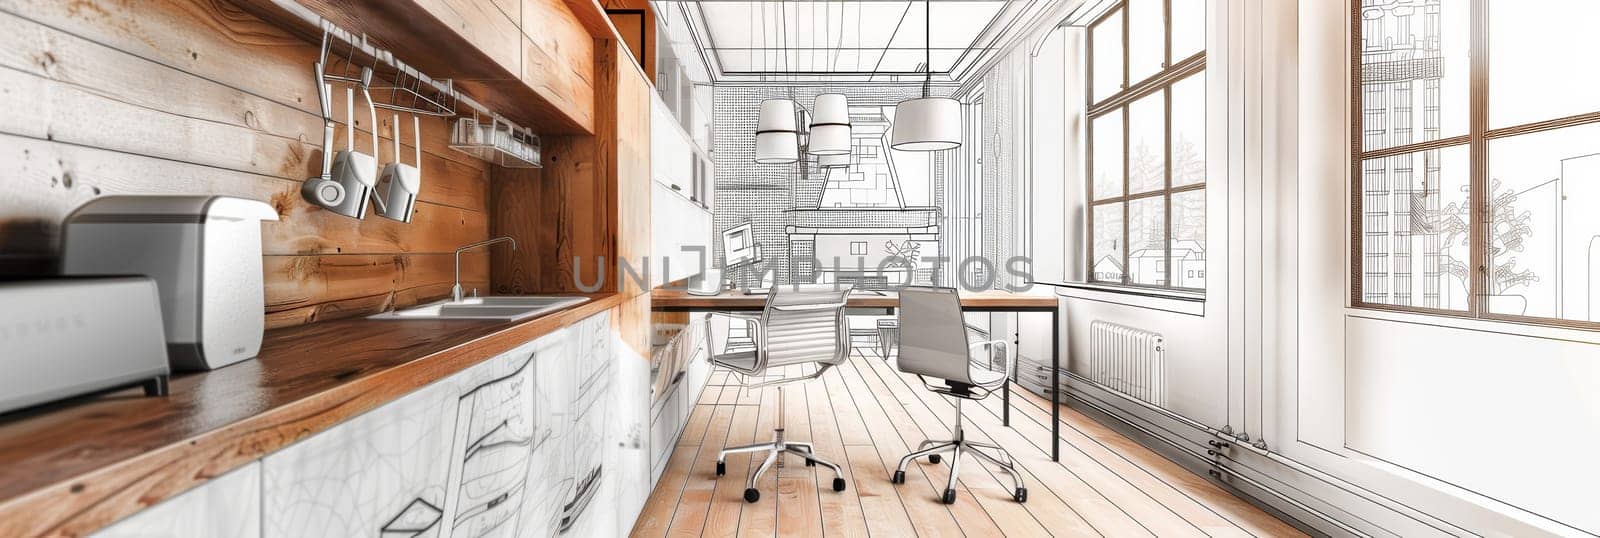 A hand-drawn illustration of a cozy kitchen with a stylish desk and chairs, inviting you to savor meals and plan recipes in a harmonious atmosphere.